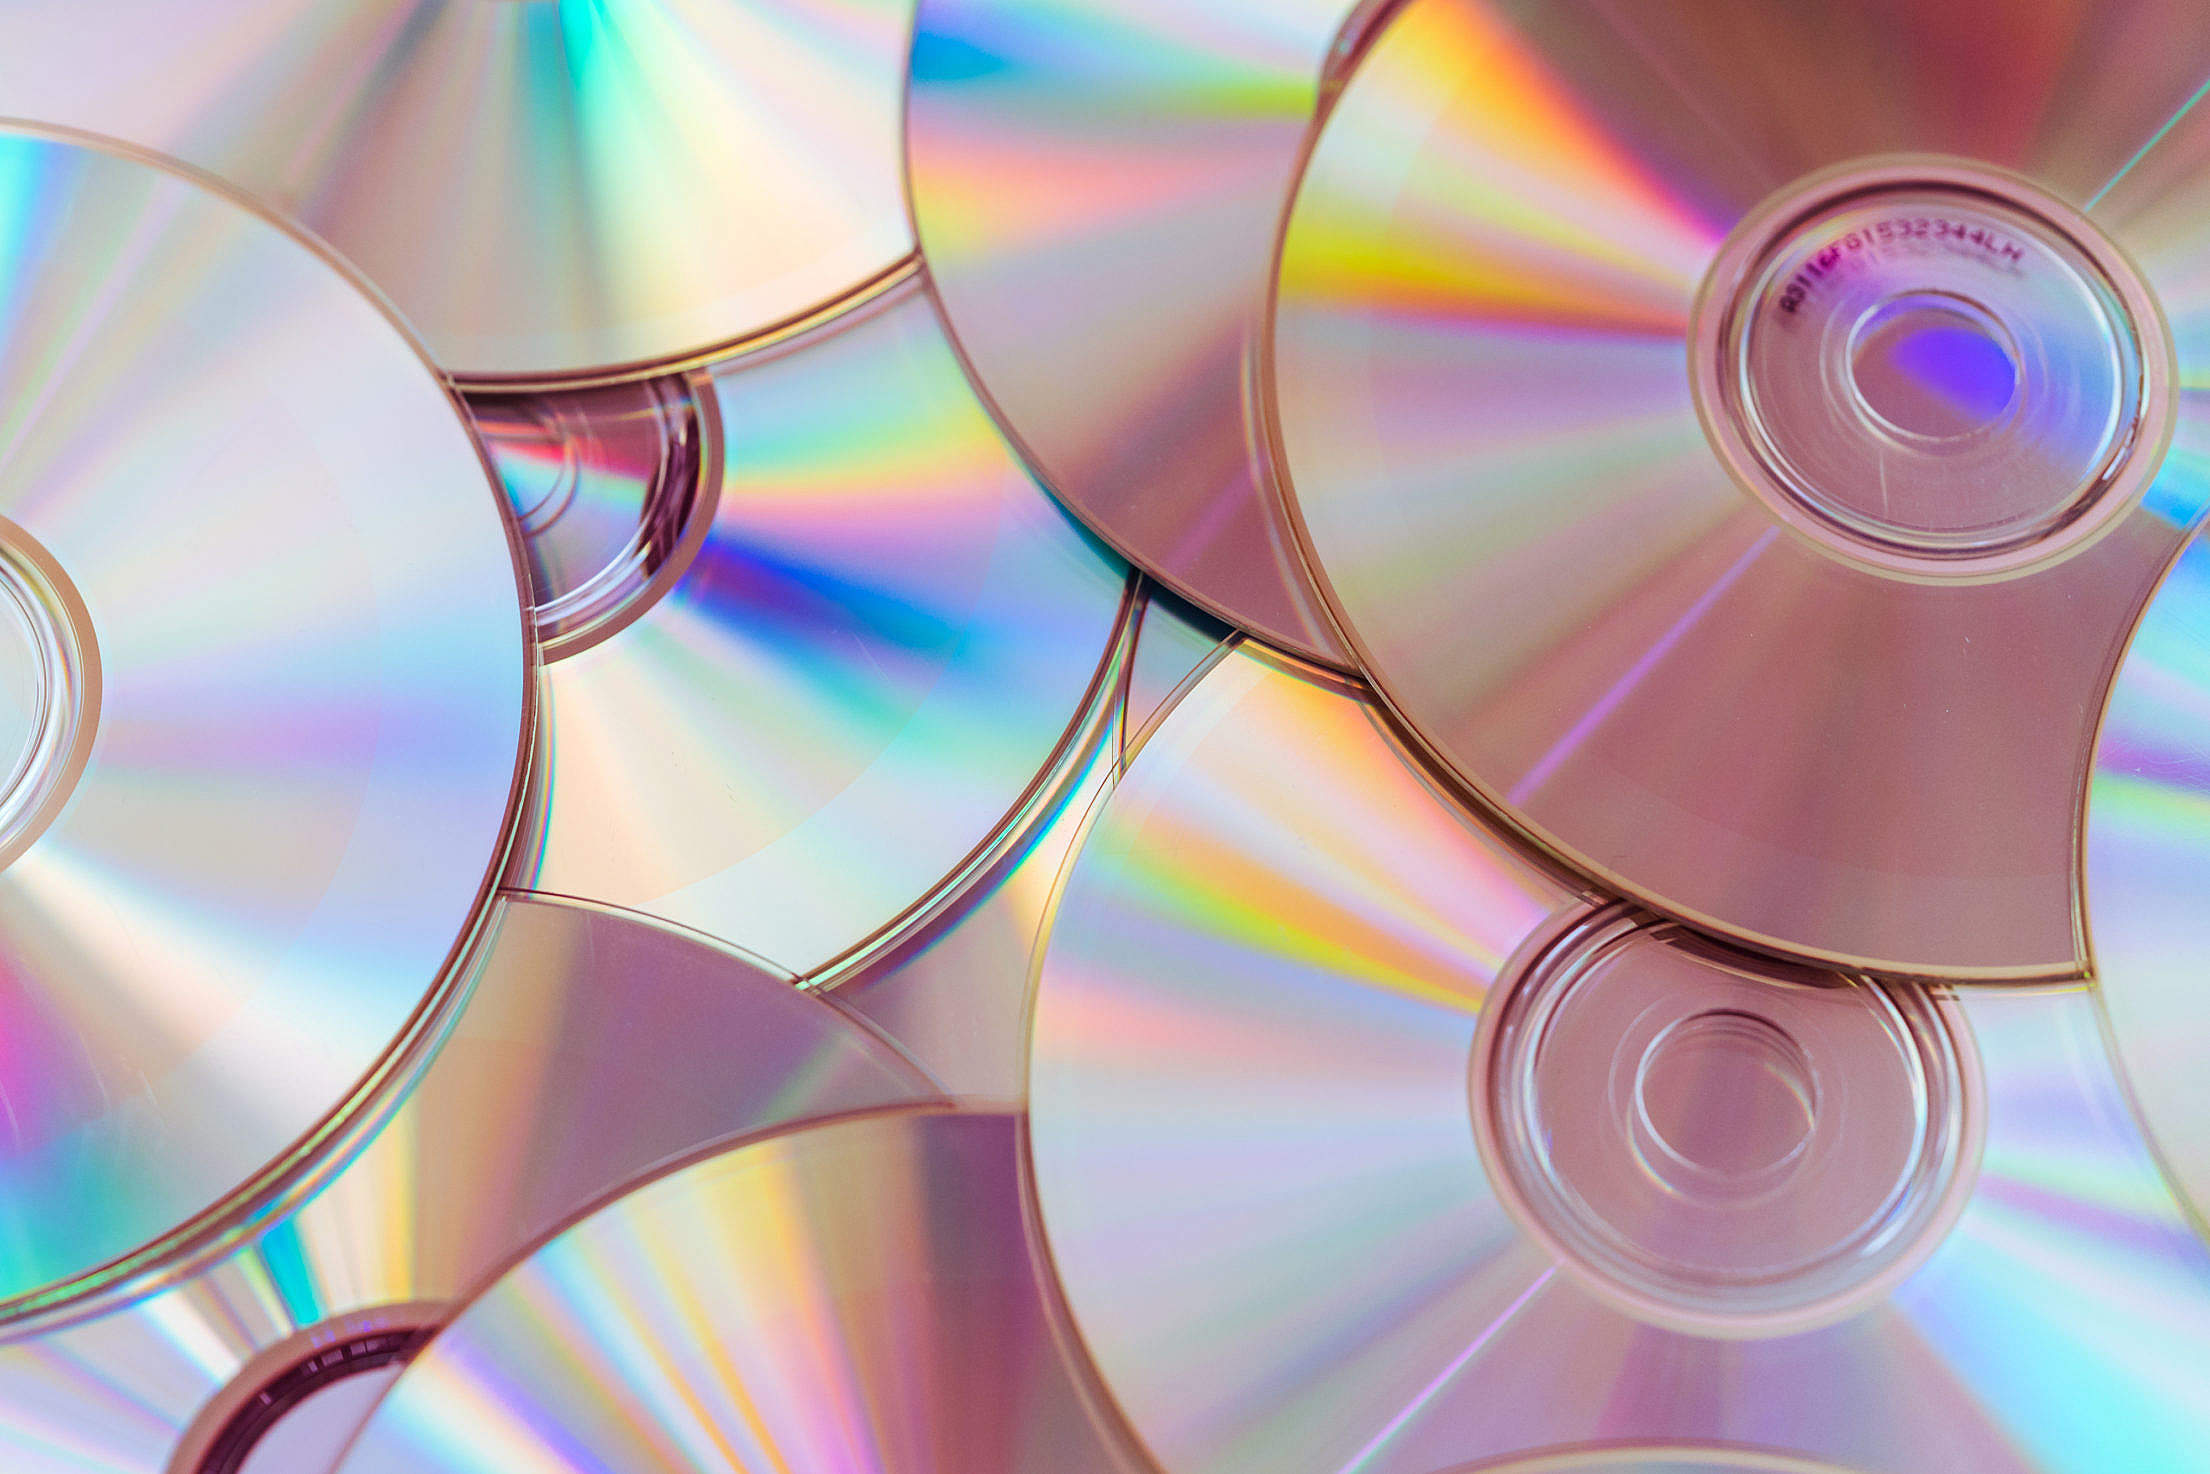 pile-of-cds-compact-discs-and-dvds-free-stock-photo-picjumbo